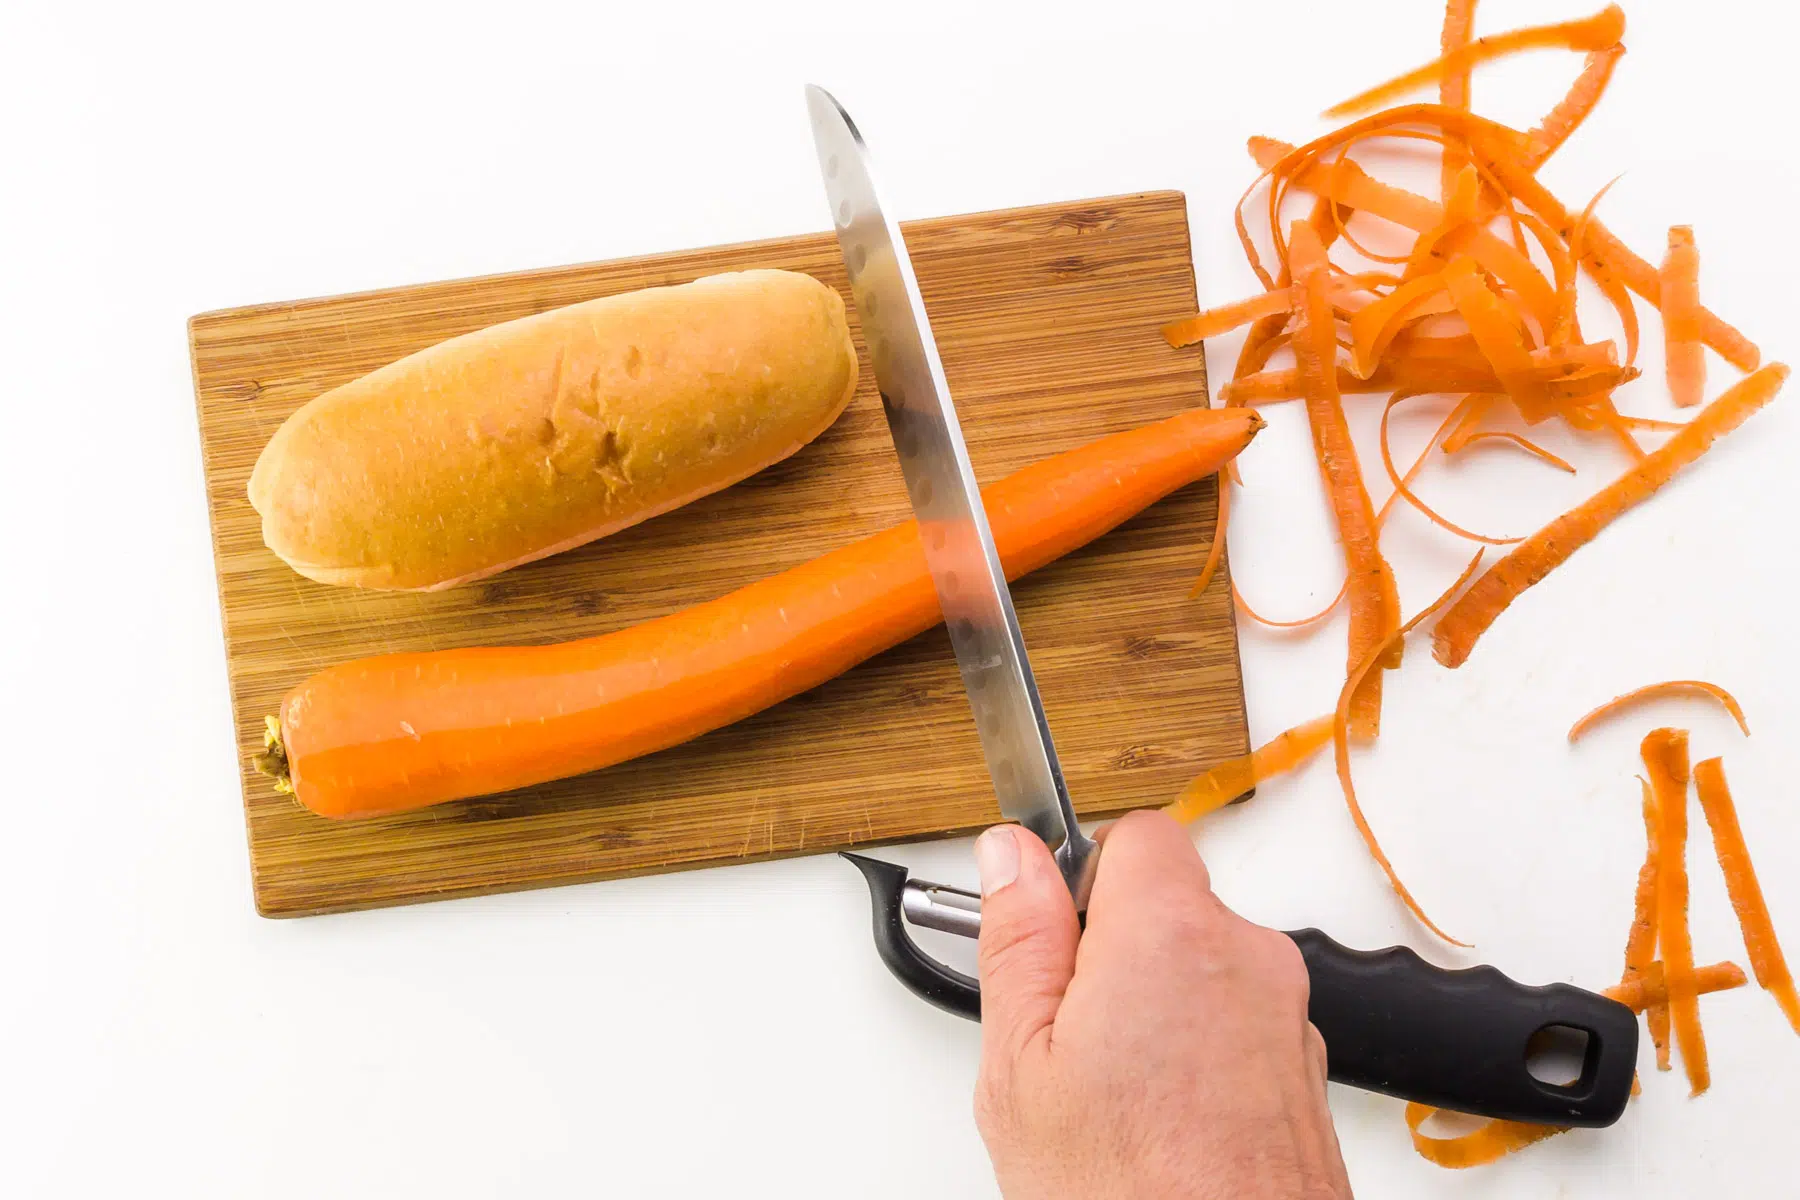 A carrot is being cut to the same length as a hot dog bun. There are carrot shreds and a shredder nearby.